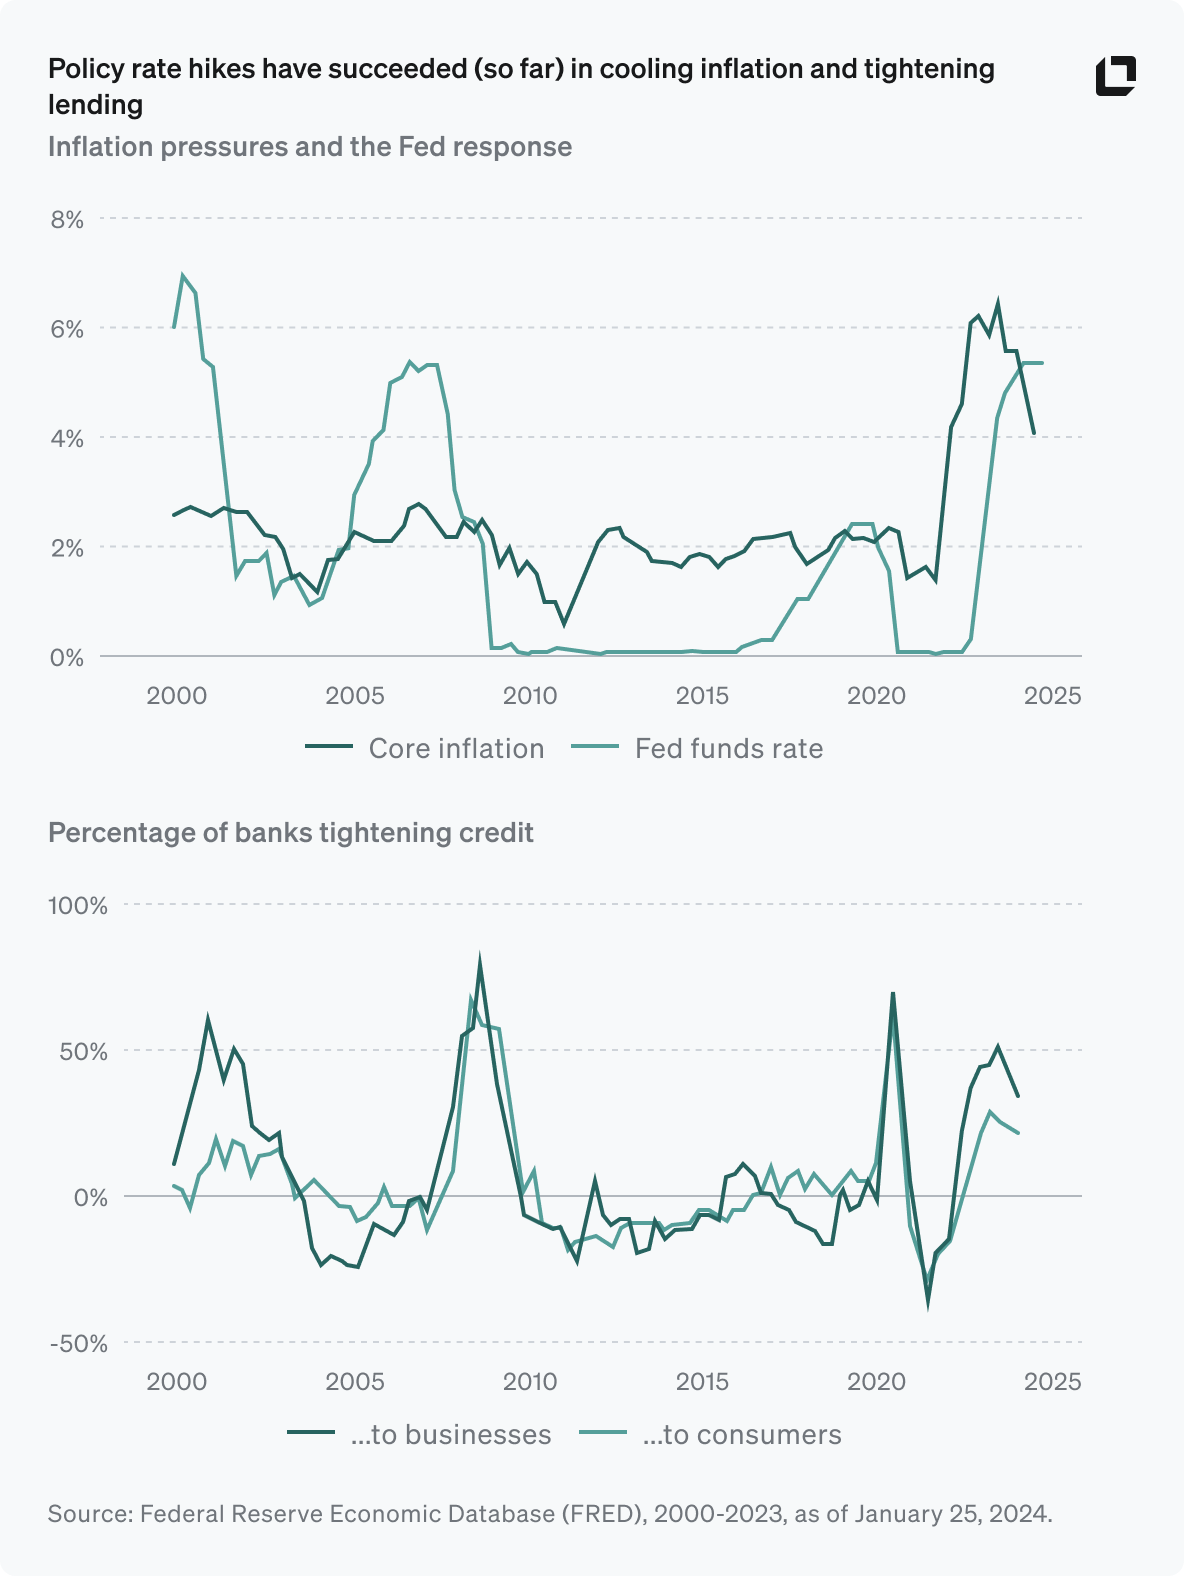 First line graph shows inflation pressures and Fed response
Second line graph shows percentage of banks tightening lending